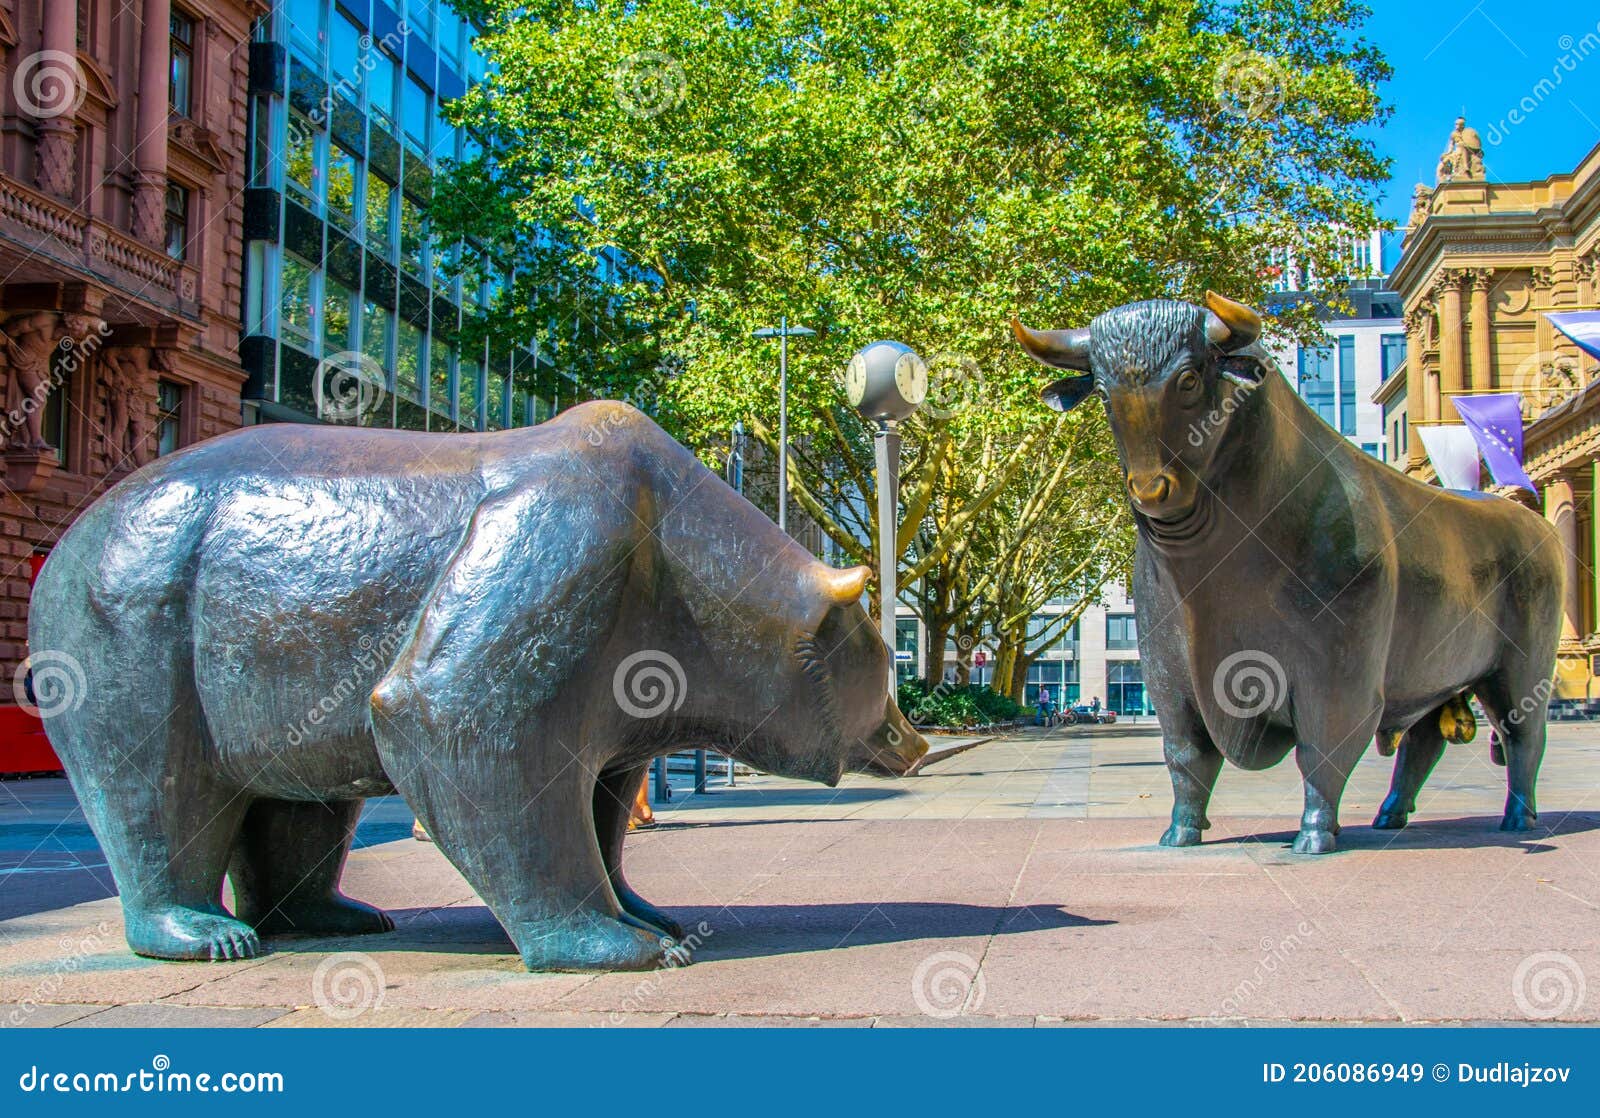 statues of a bear and a bull in front of stock exchange building in frankfurt, germany